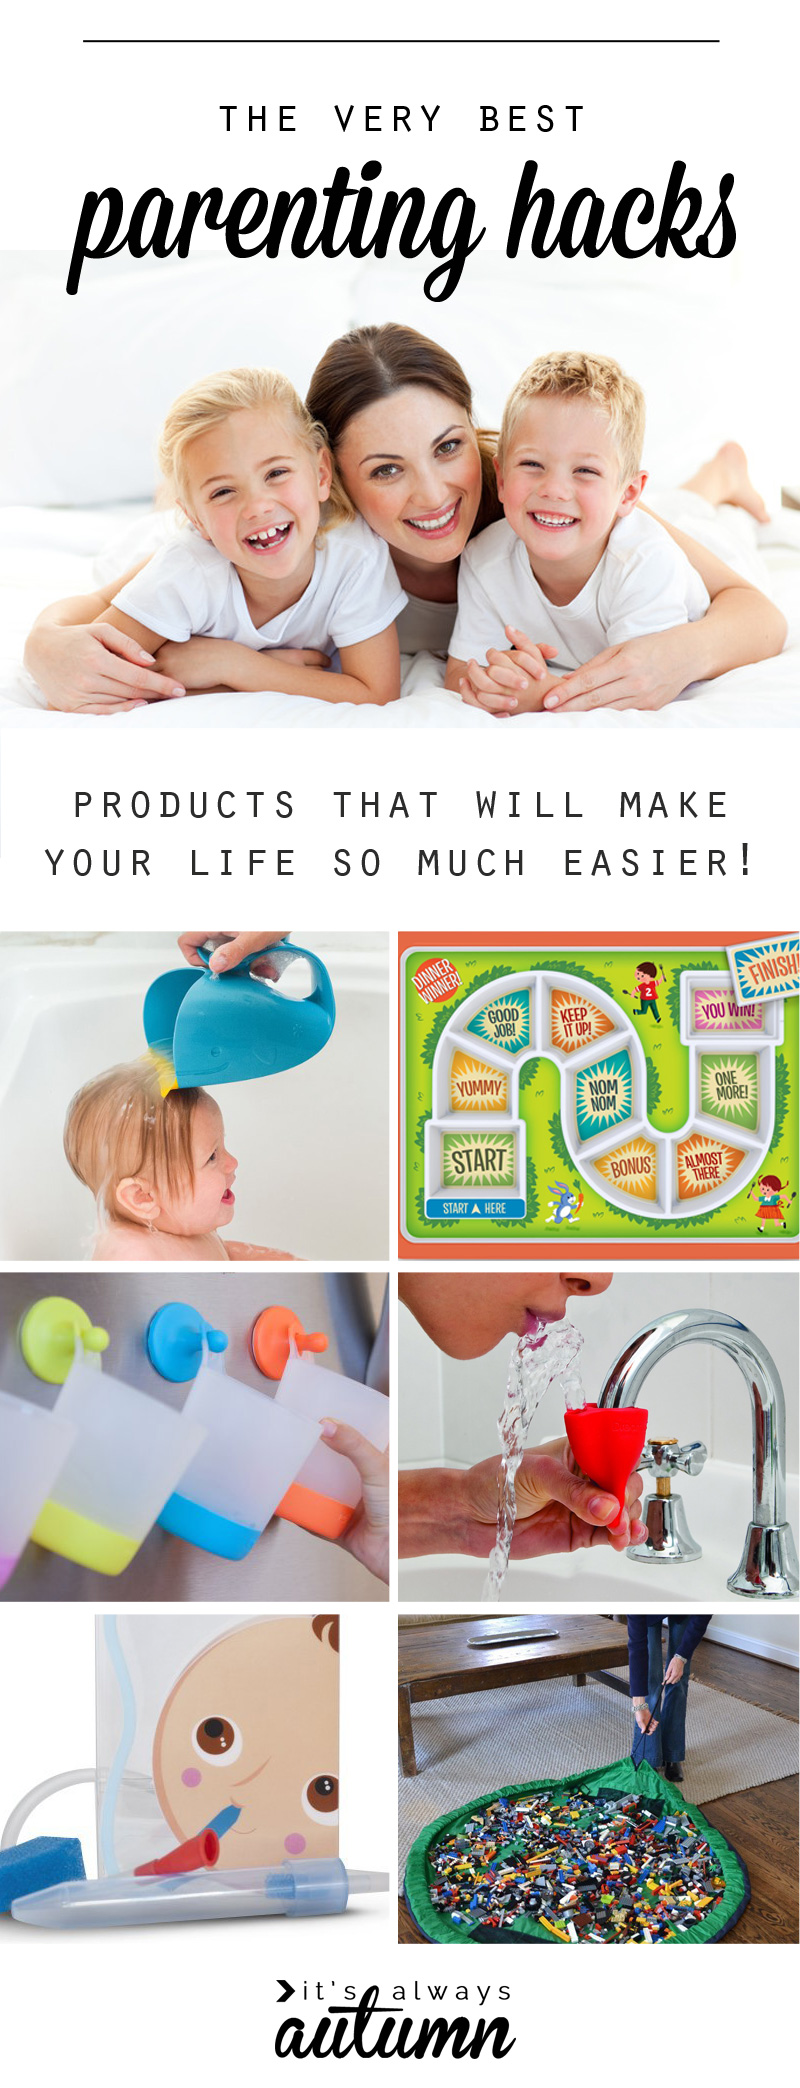 Mom and little kids; collage of products to make life with kids easier